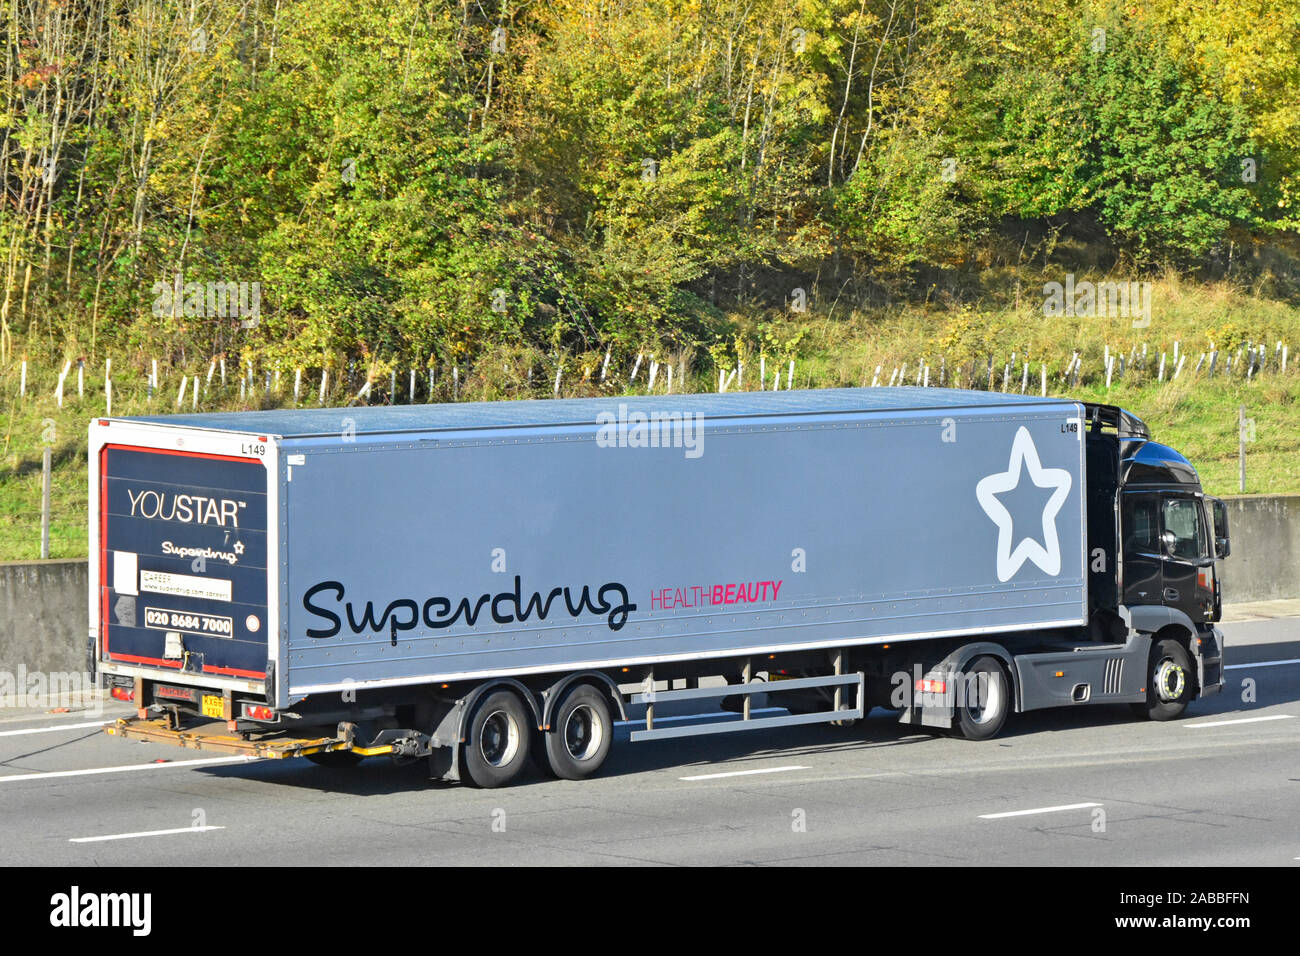 Back & side view Superdrug Health & Beauty retail business supply chain hgv lorry truck with trailer advertising brand style & logo UK motorway Essex Stock Photo